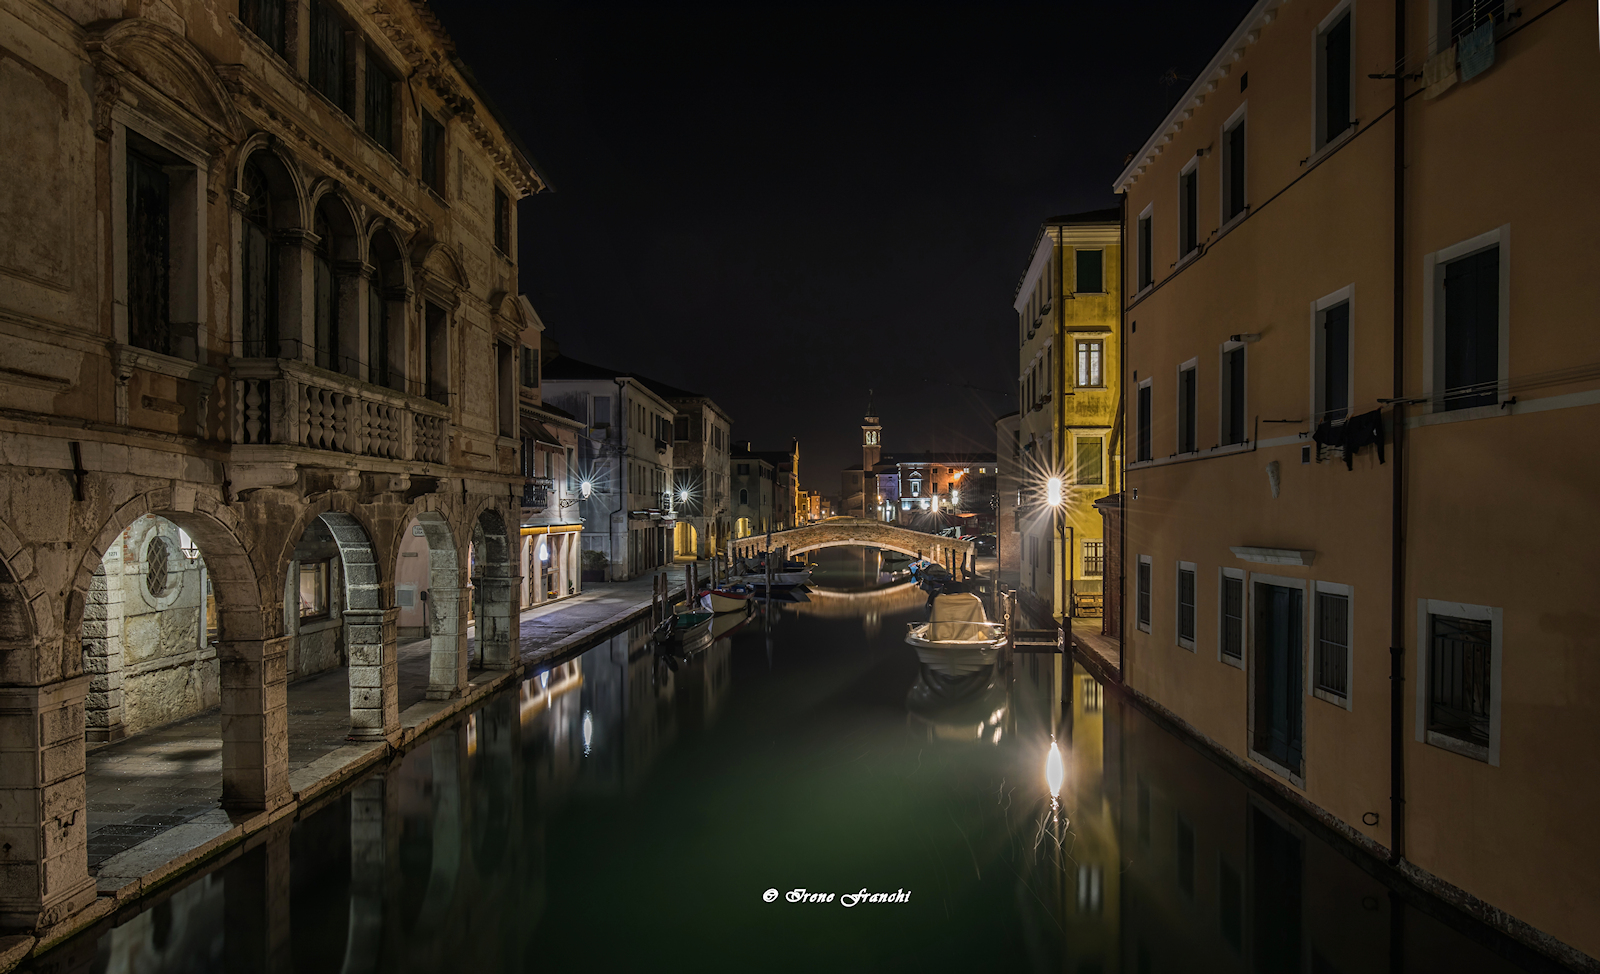 Chioggia and its canals...